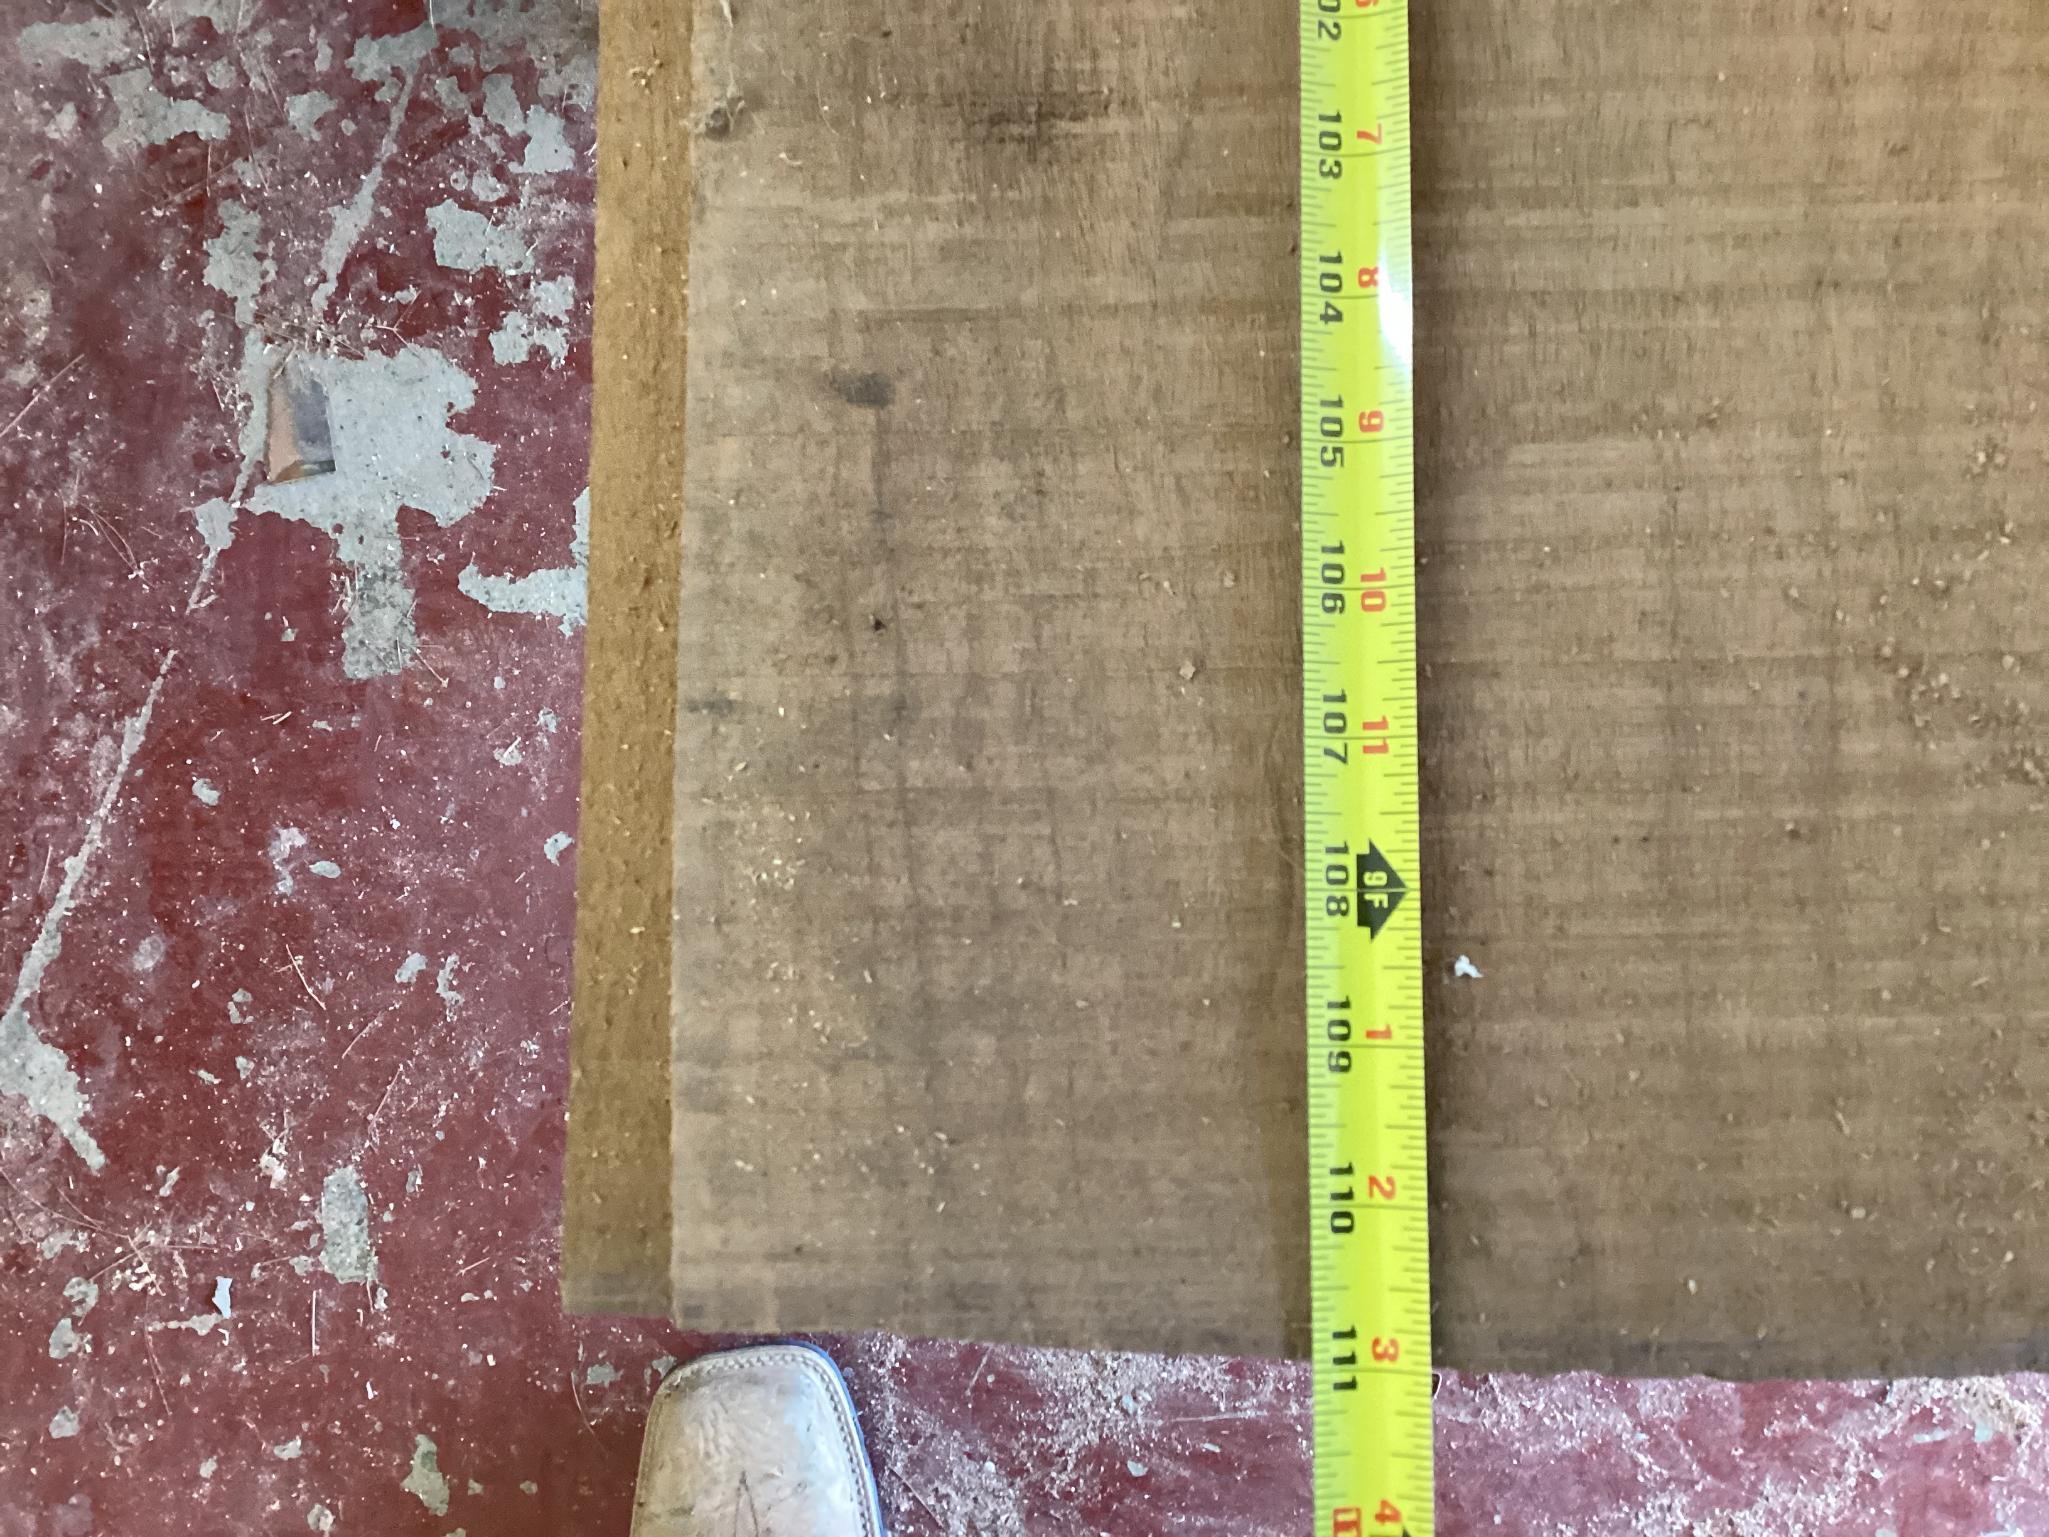 Walnut lumber, Various Length Up to 9' Long and 13" Wide